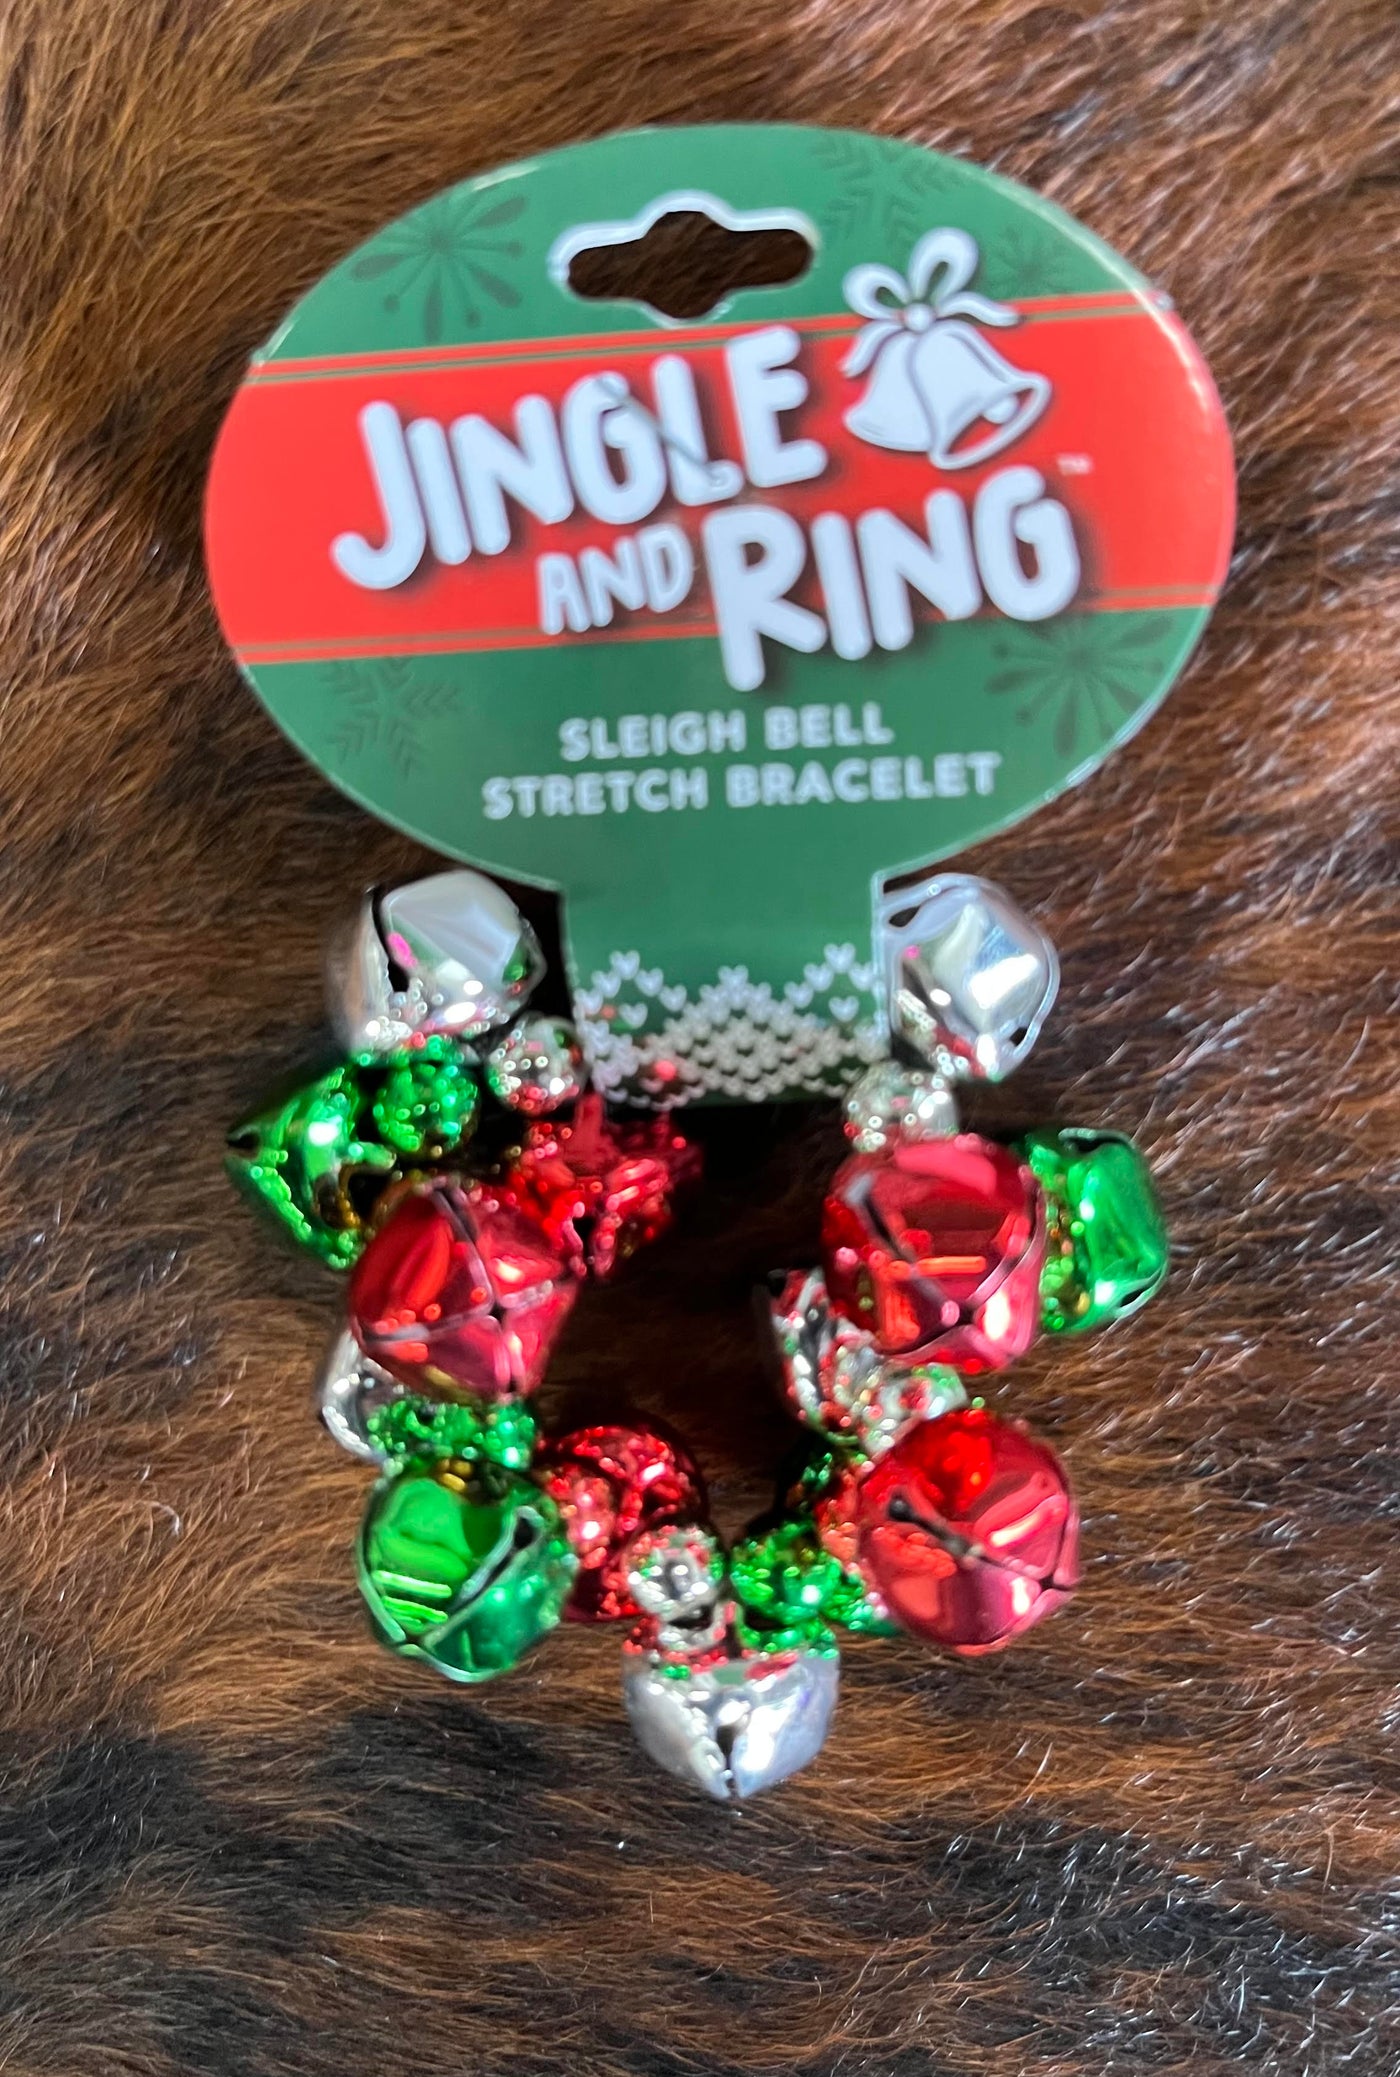 Jingle and Ring Sleigh Bell Stretch Bracelet